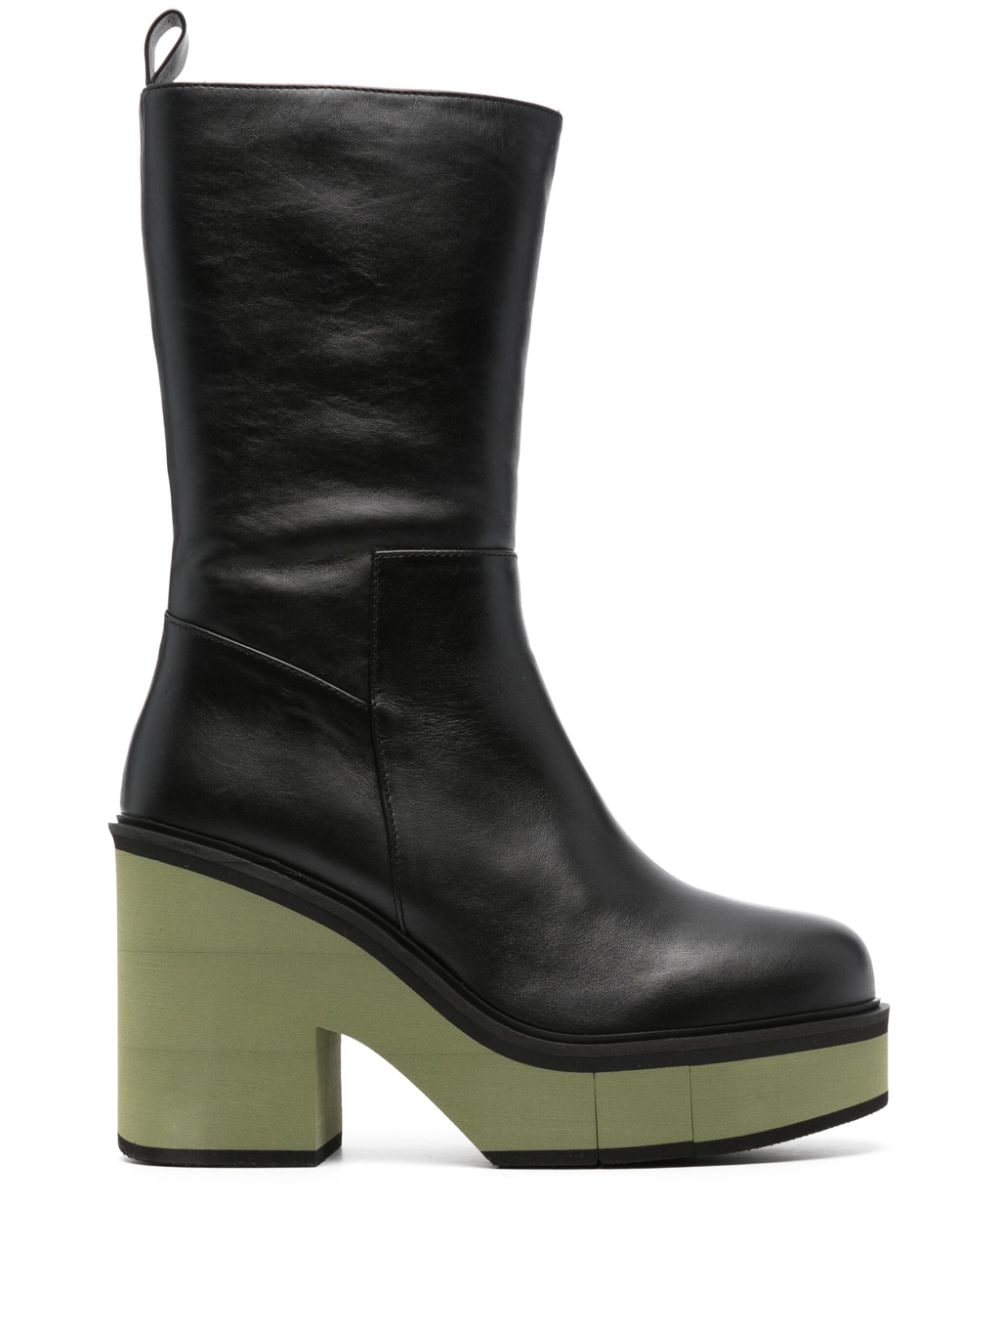 Paloma Barceló Brook 100mm leather boots